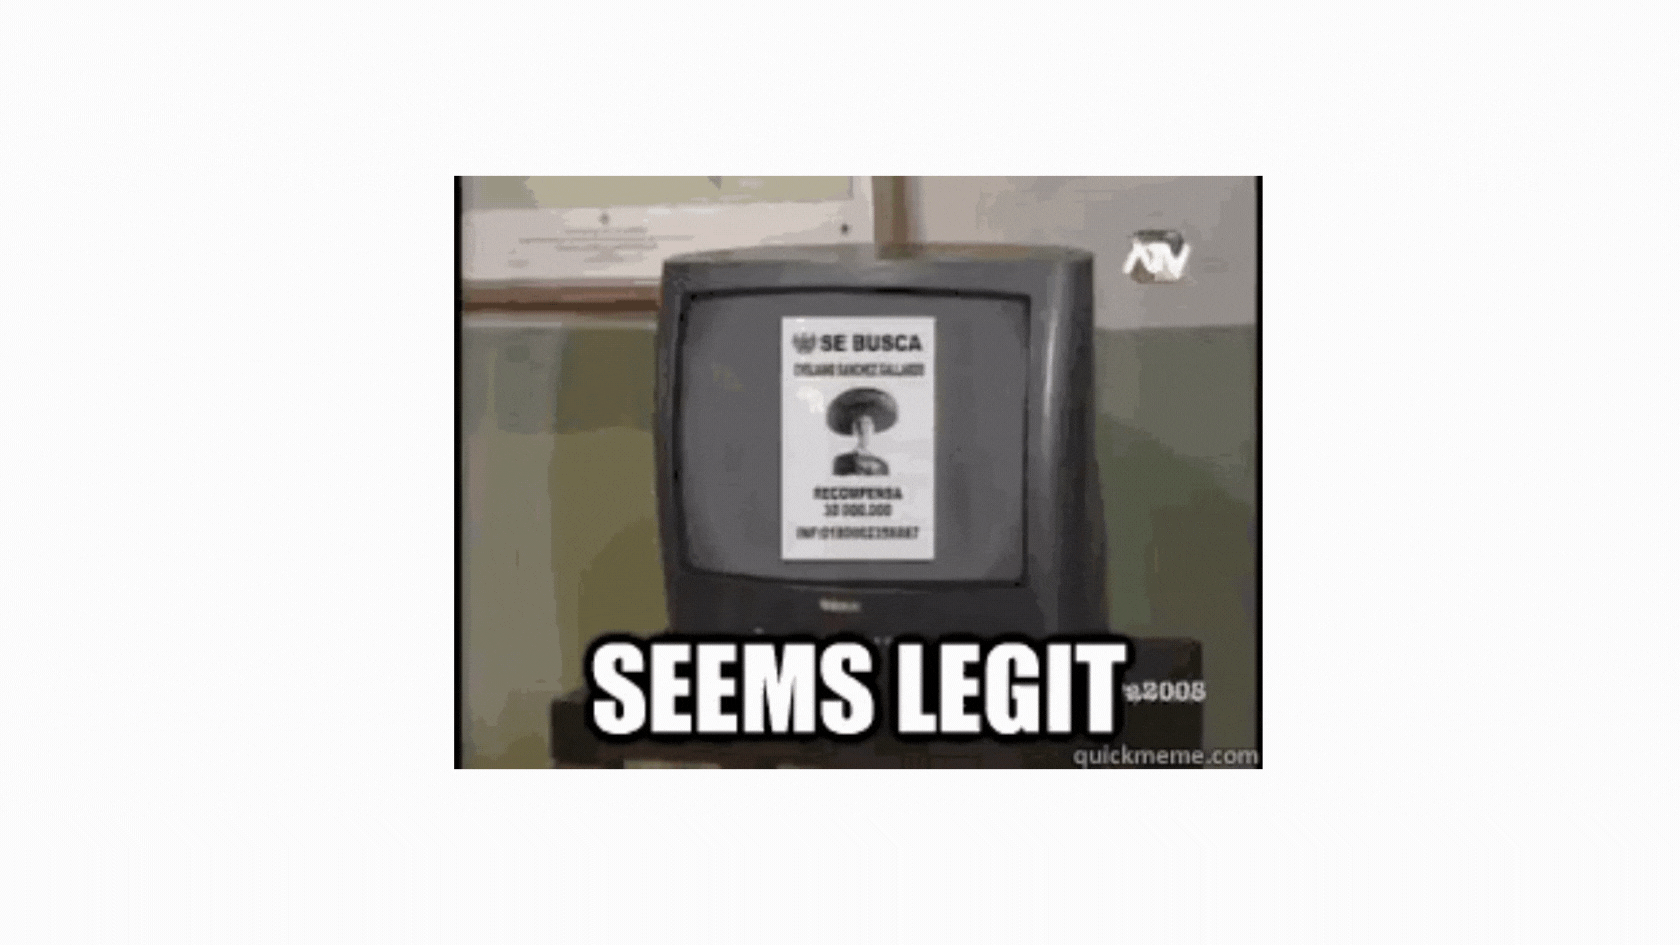 GIF titled "seems legit". Two people looking at a TV with a poster on it